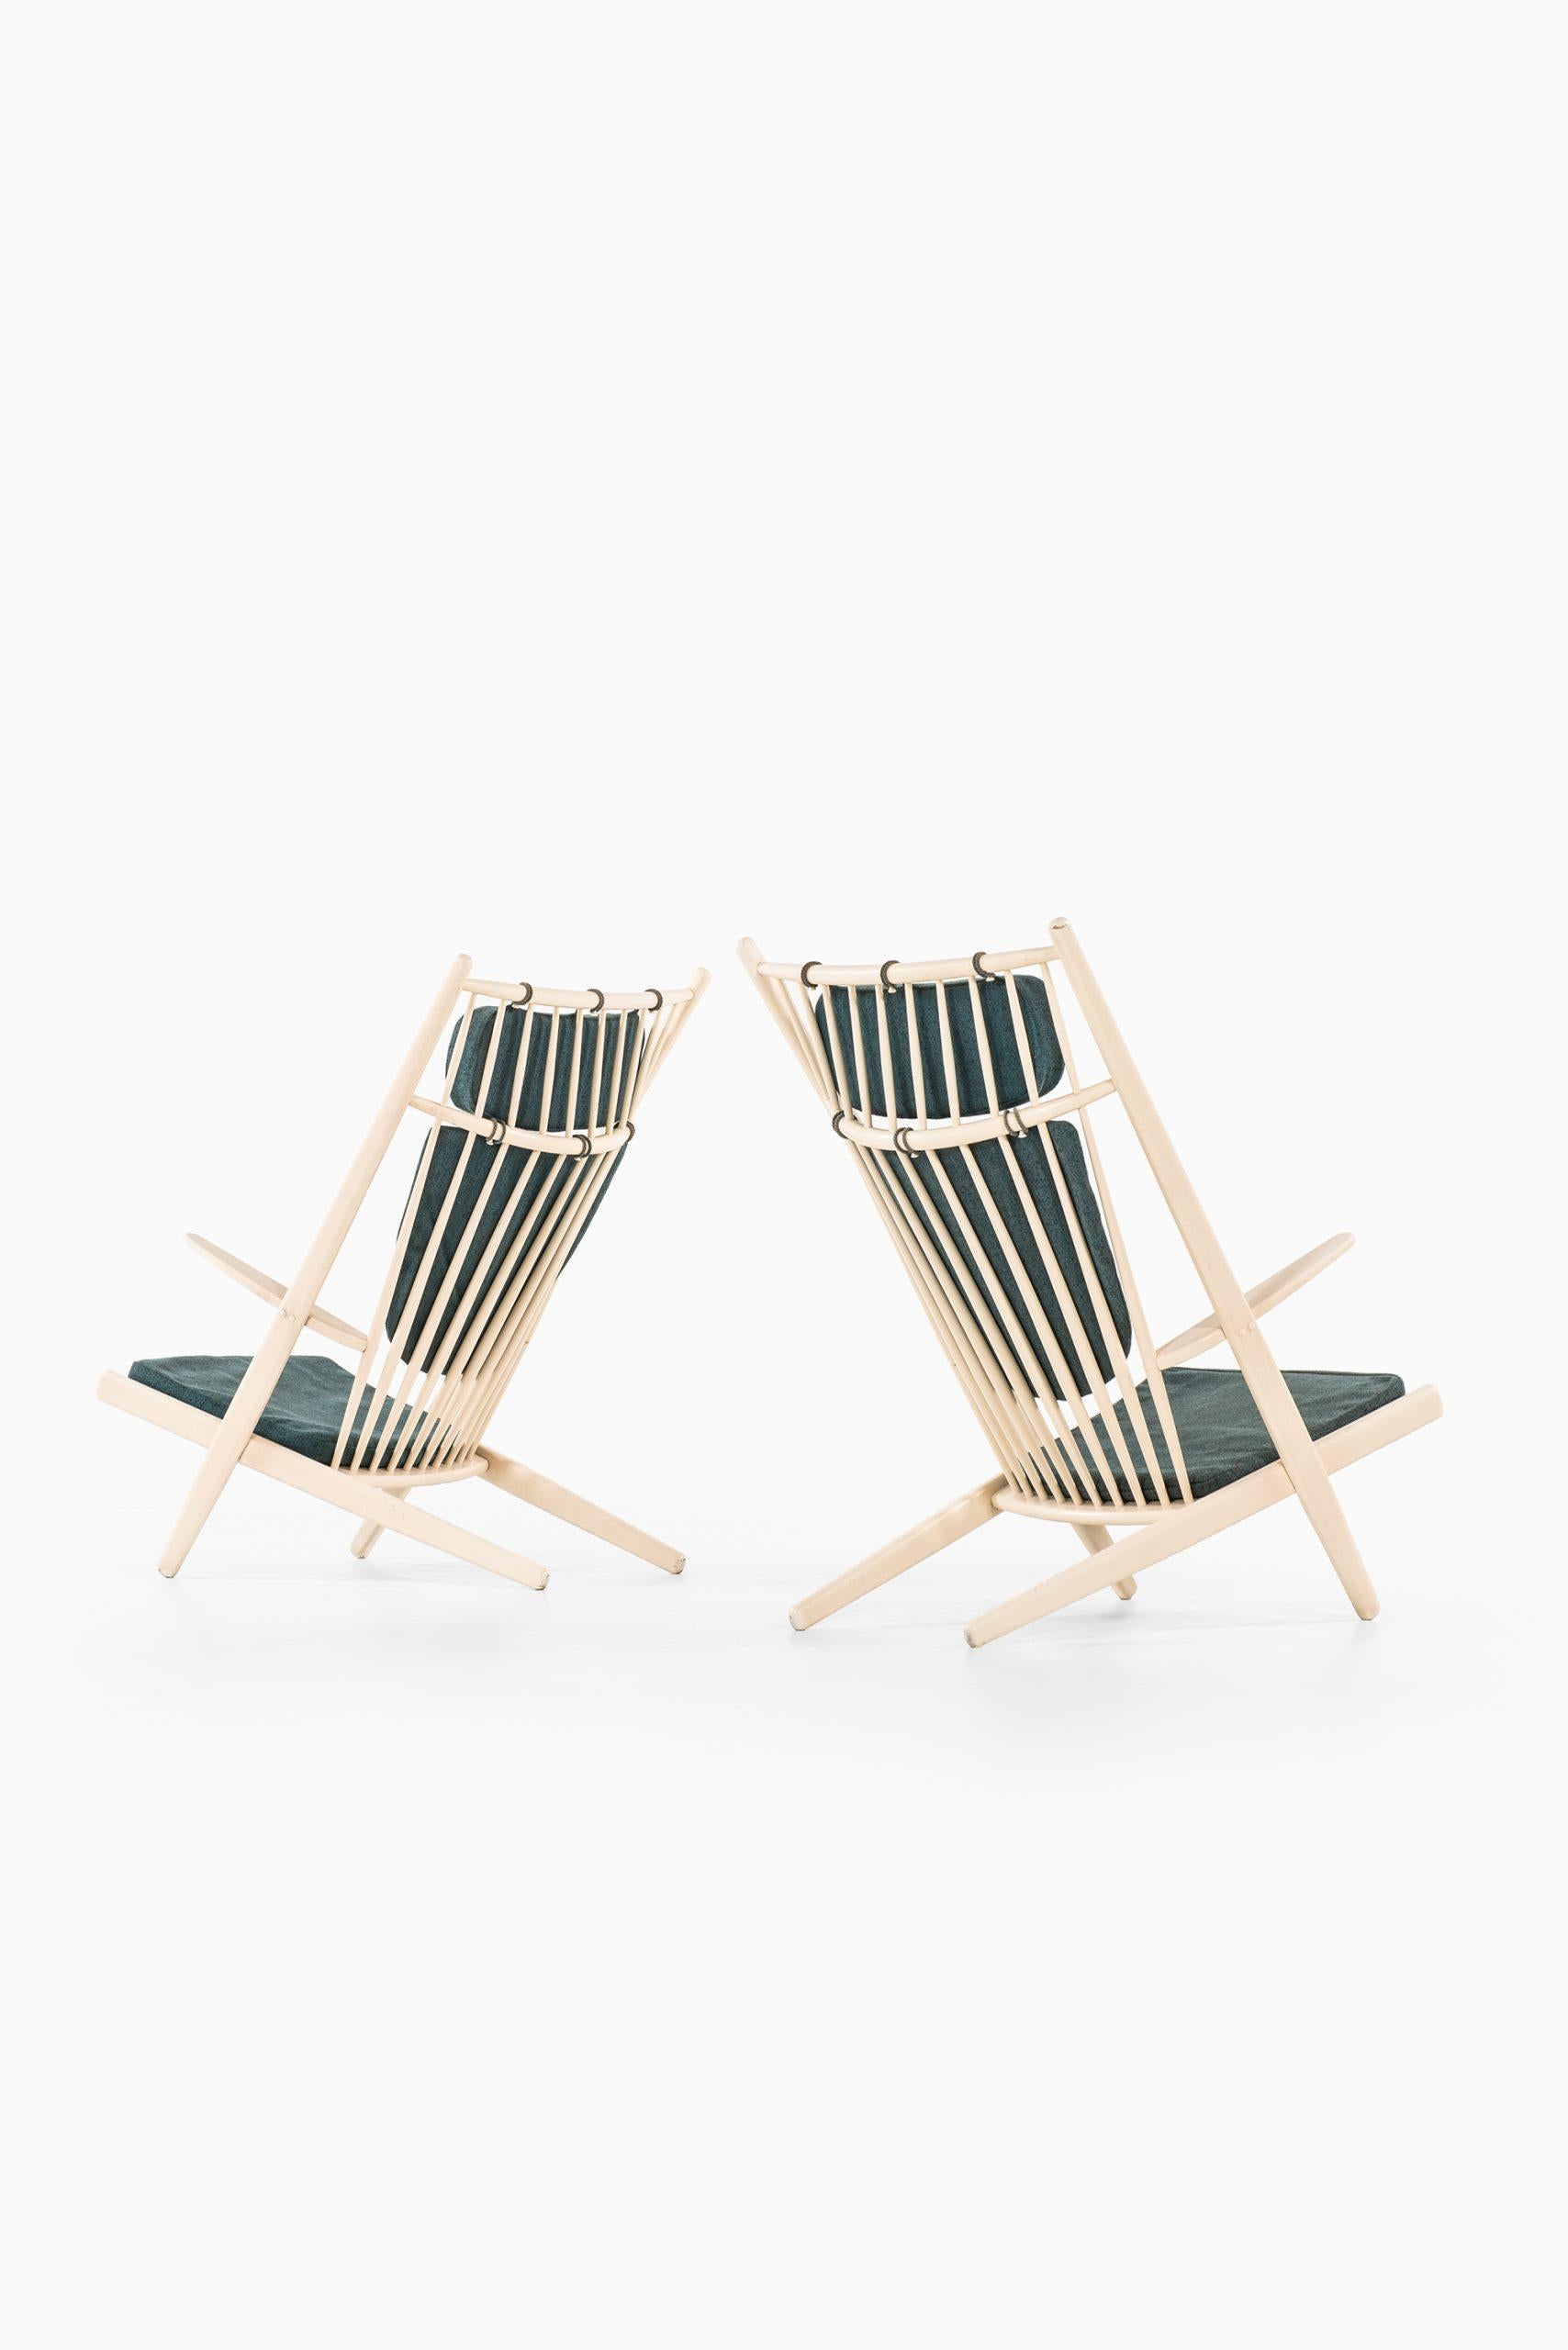 Mid-20th Century Poul Volther Easy Chairs Model Goliat Produced by Gemla in Sweden For Sale